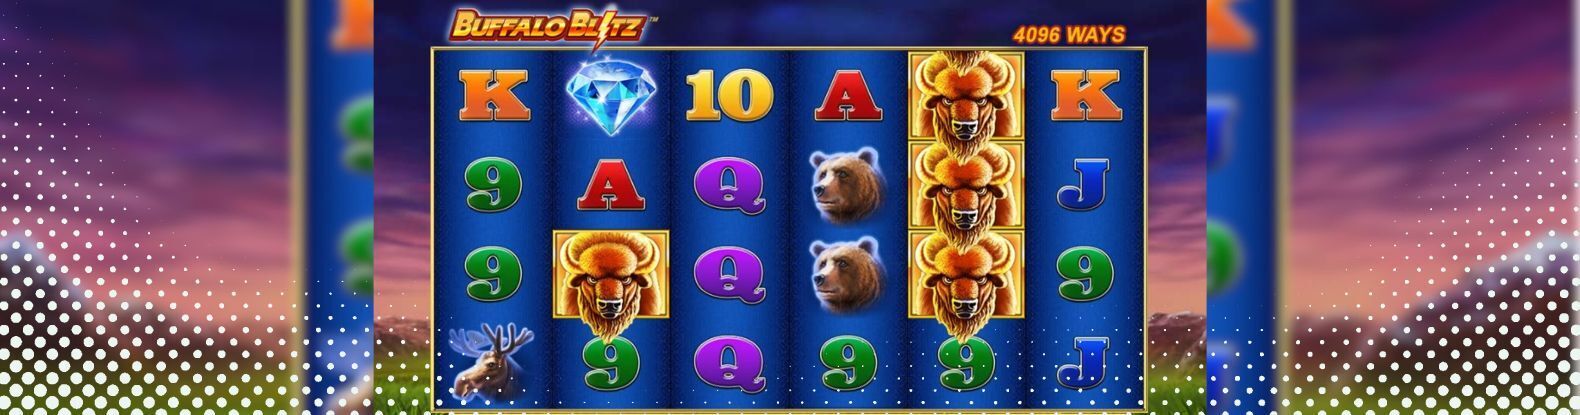 This is a screenshot of Buffalo Blitz Online pokies game by Playtech